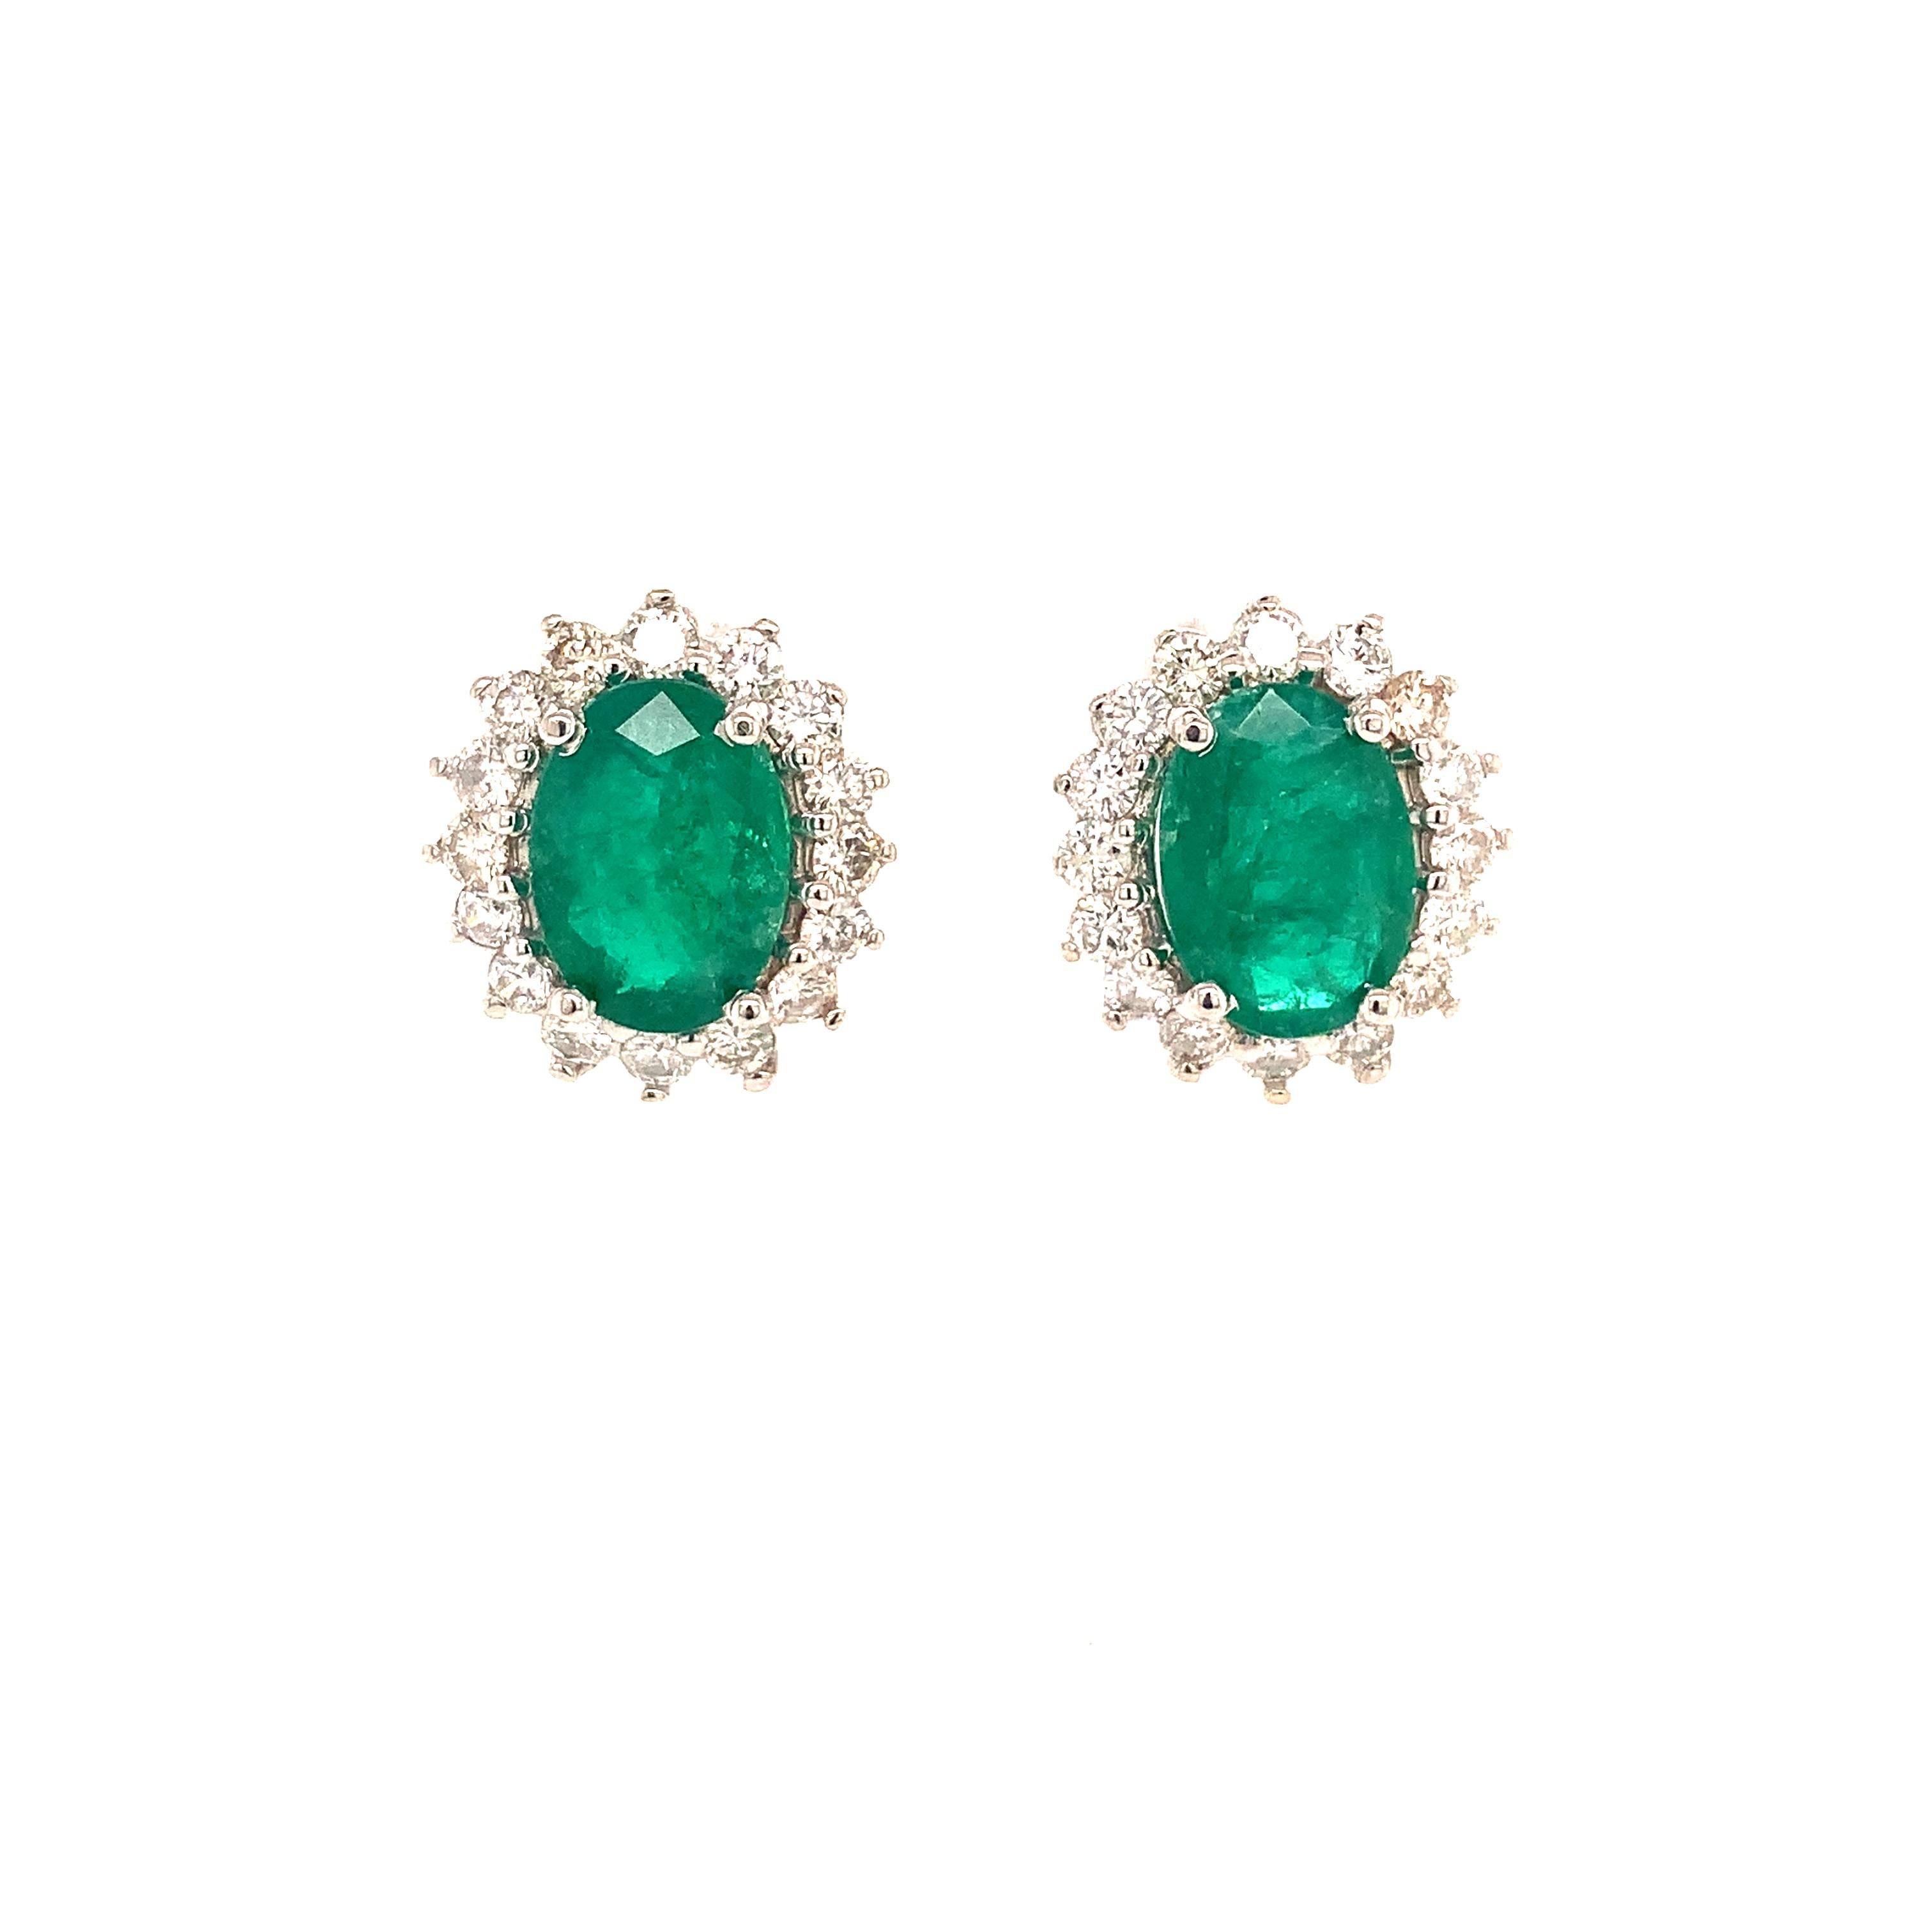 Natural Emerald Diamond Earrings 14k Gold 5.03 TCW Certified For Sale 2